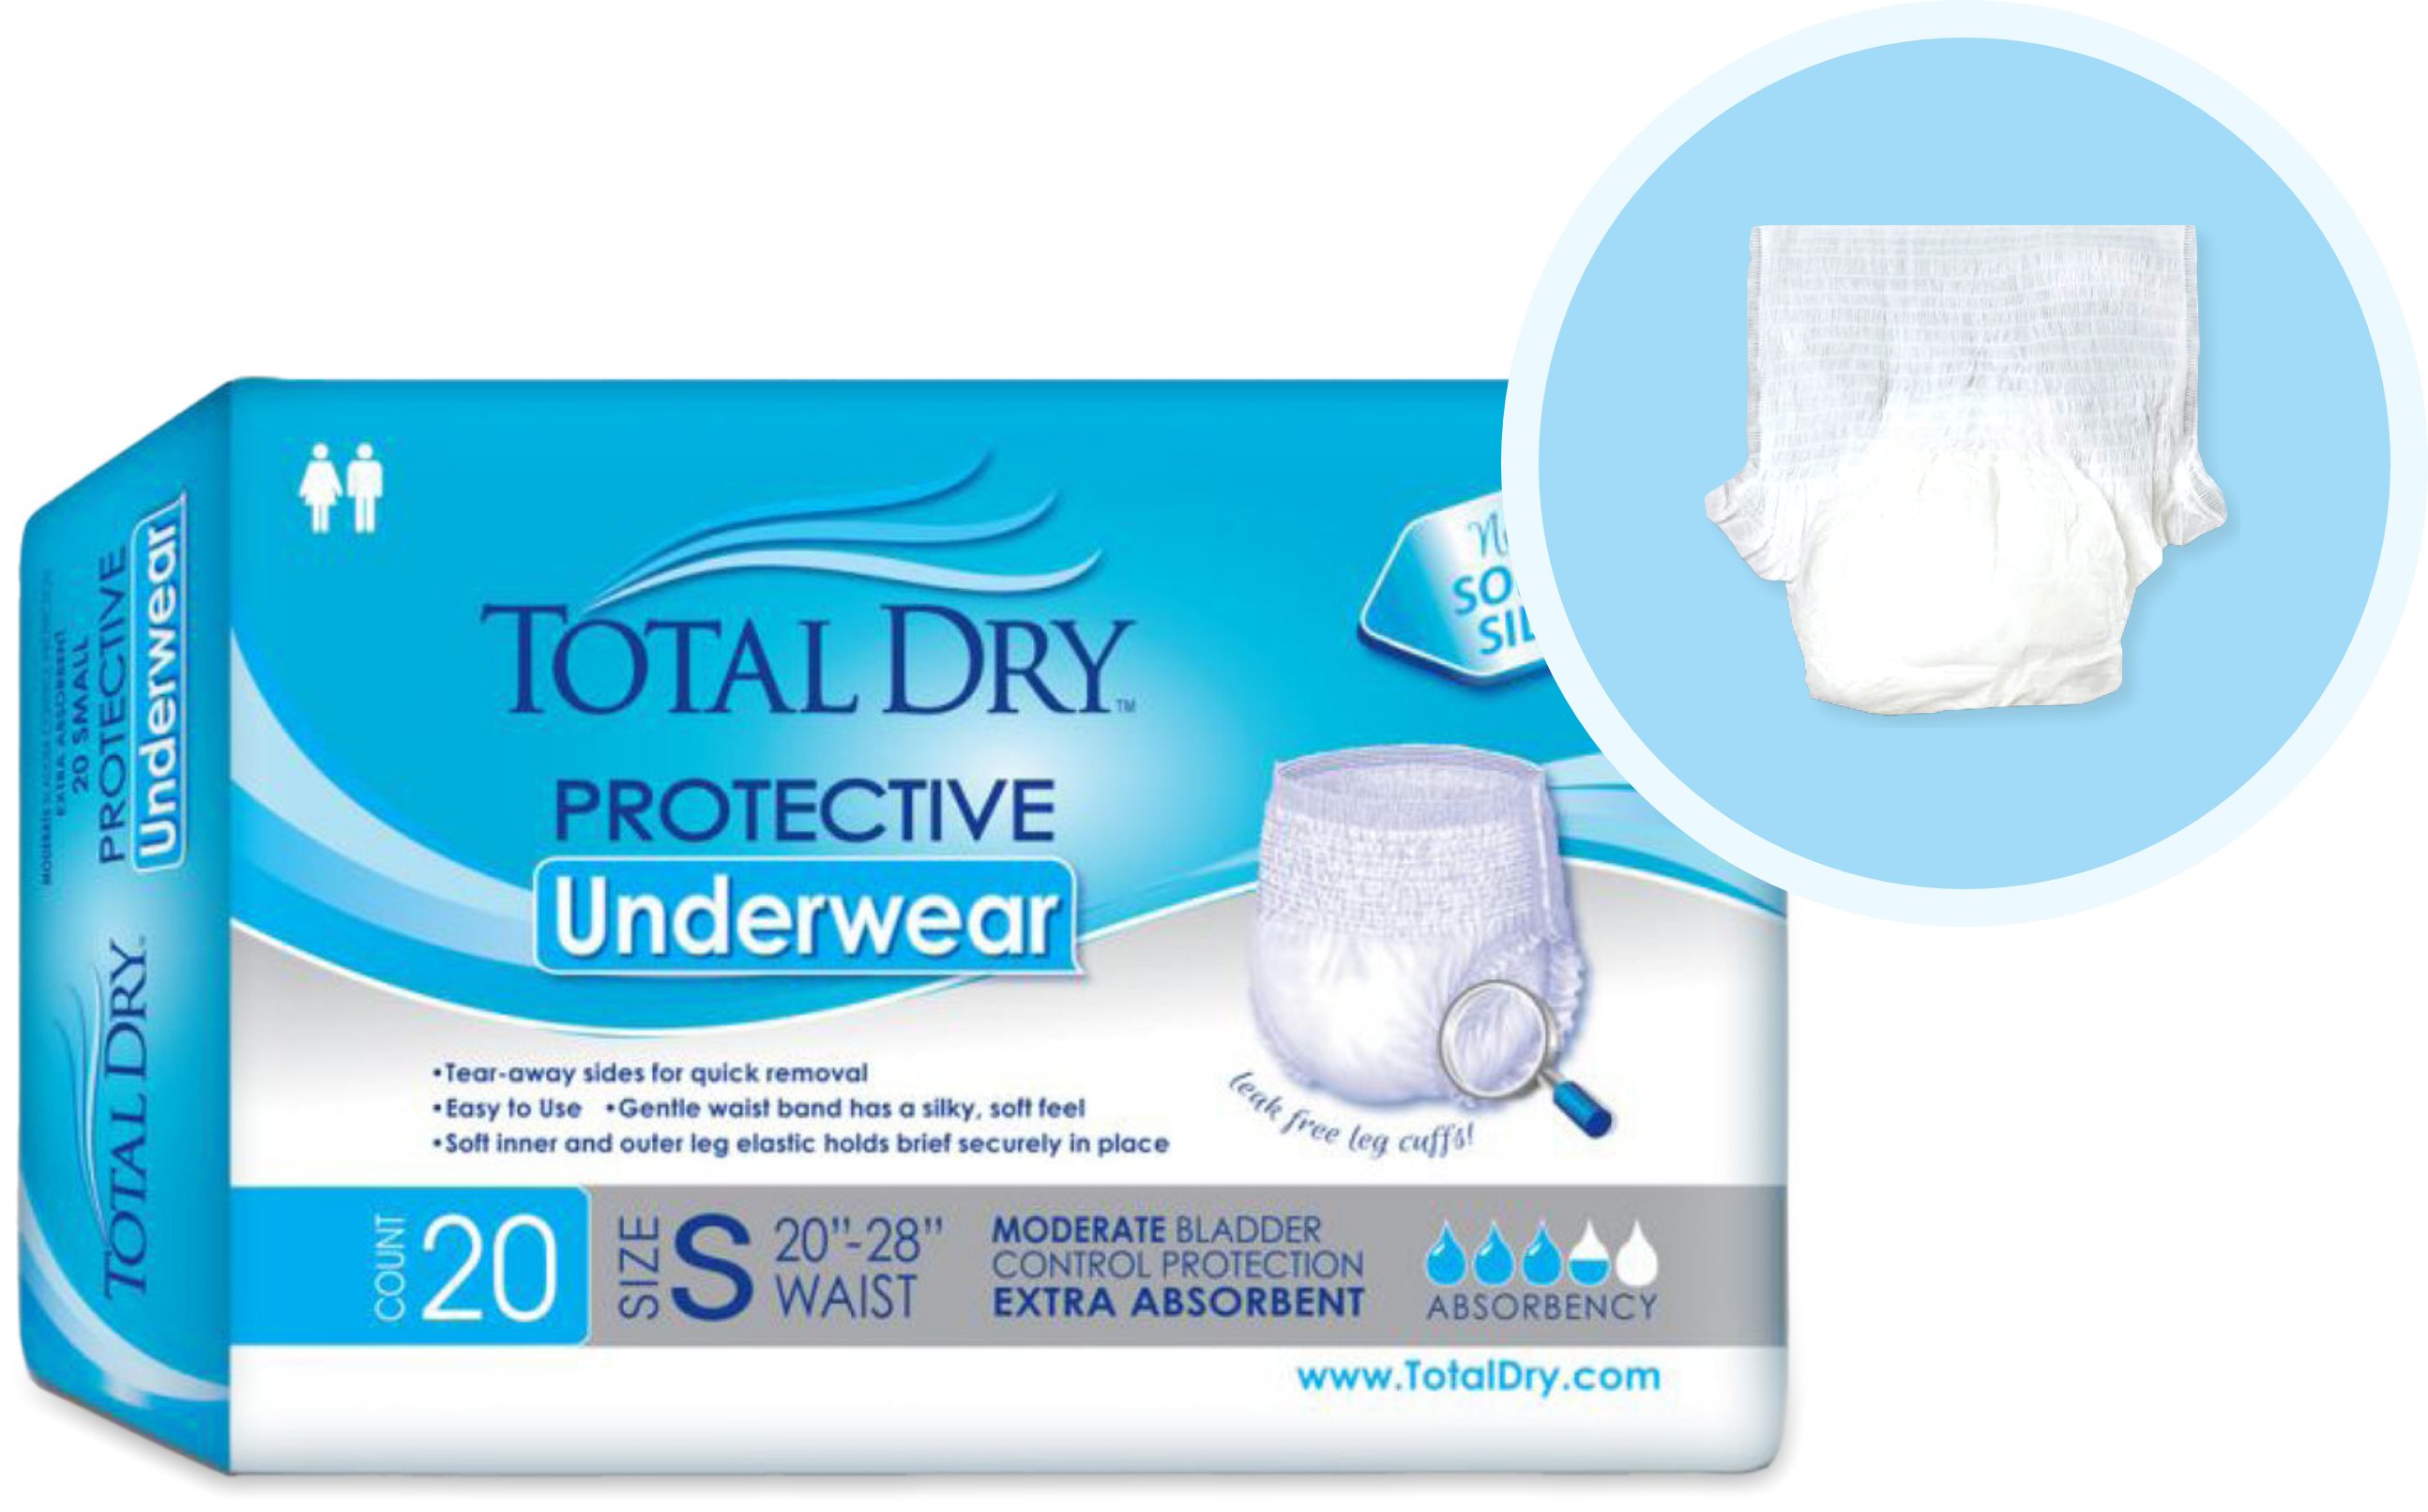 HSA Eligible  Because Booster Pads for Bladder Control Underwear